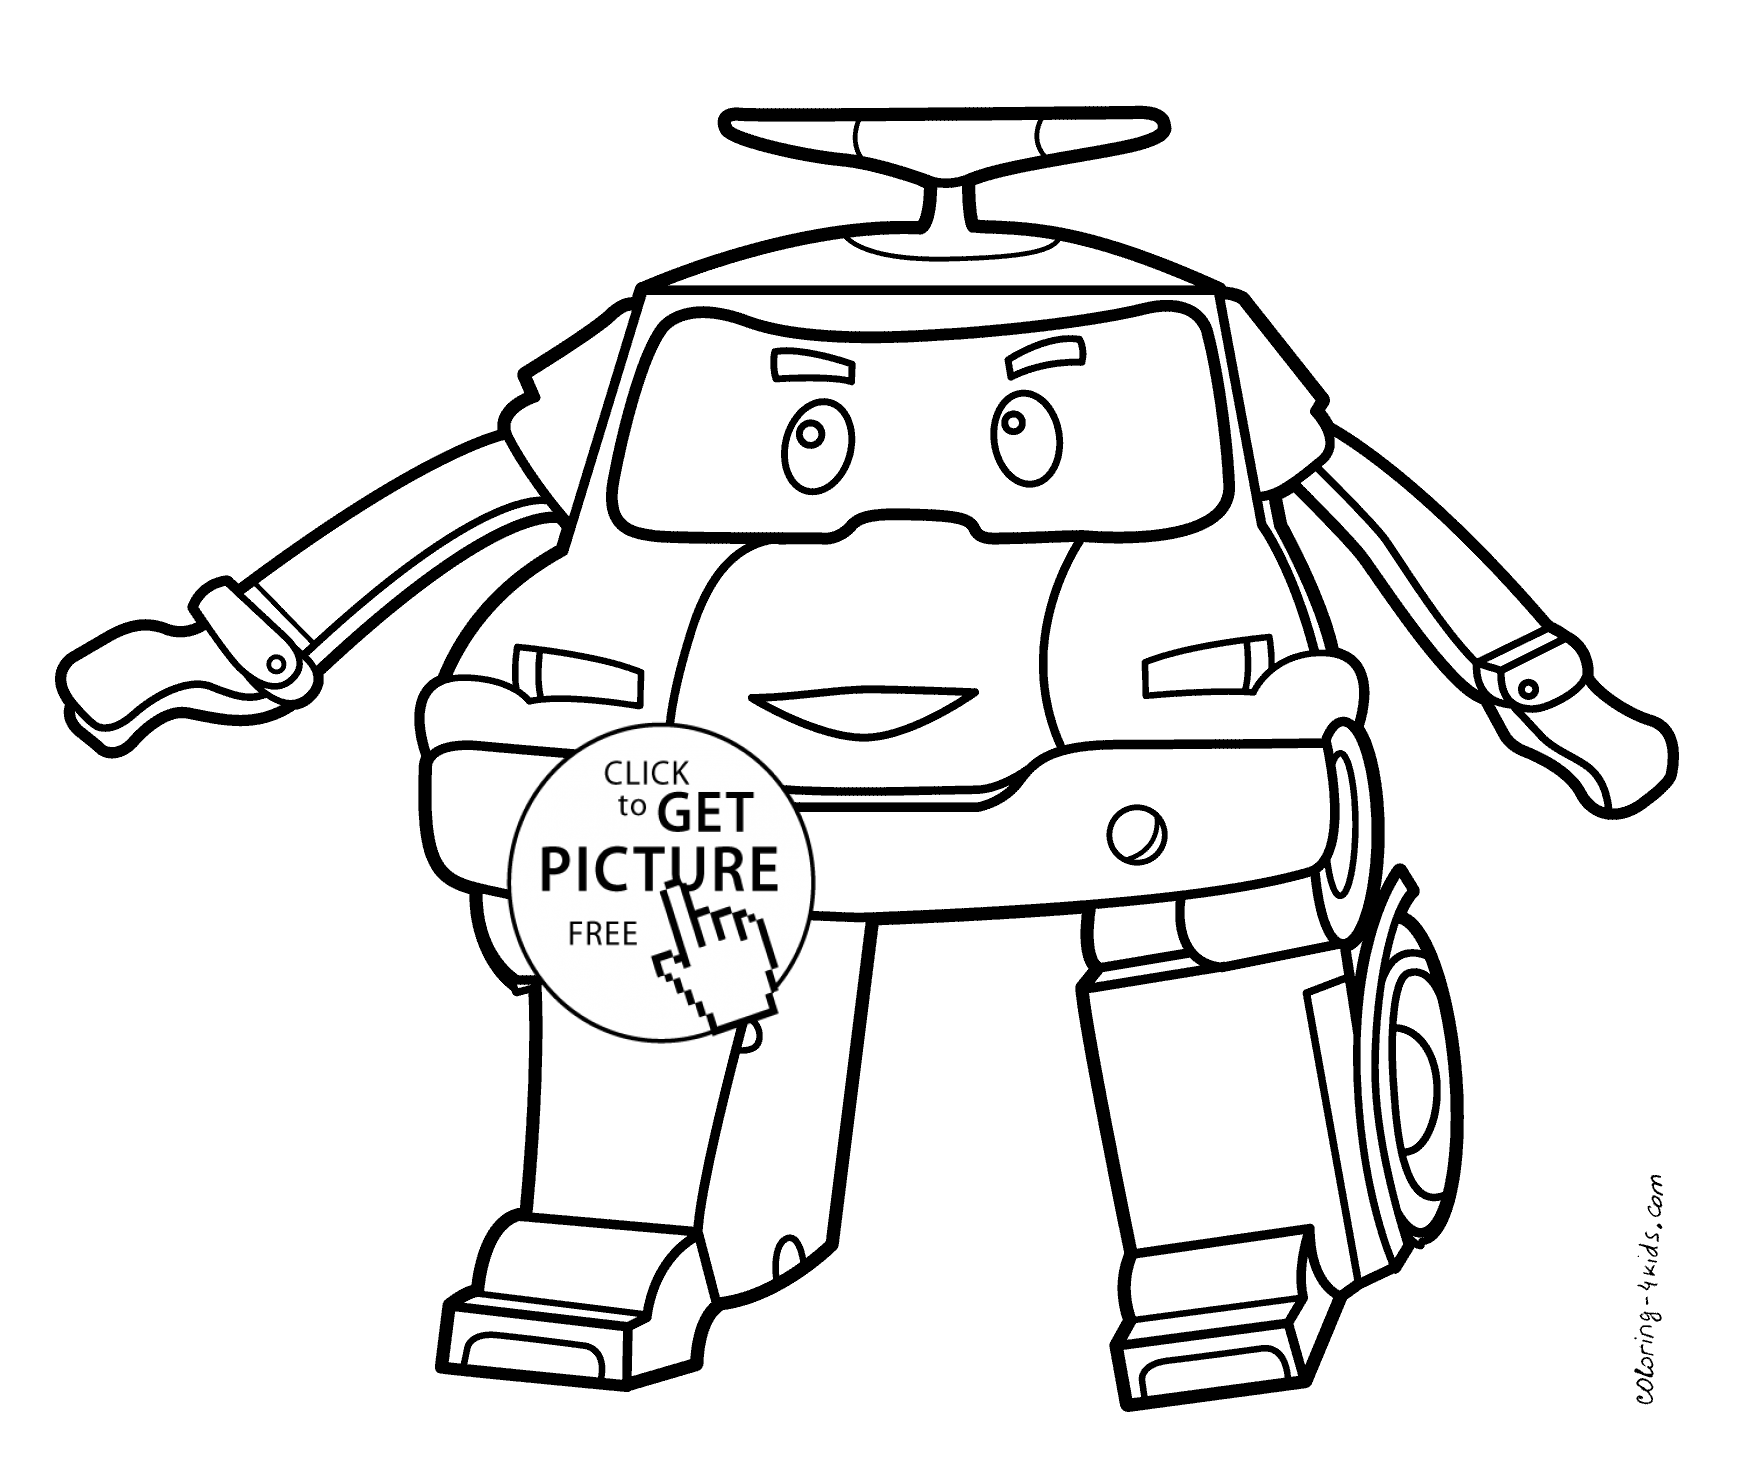 Robocar Poli coloring pages for kids, printable free